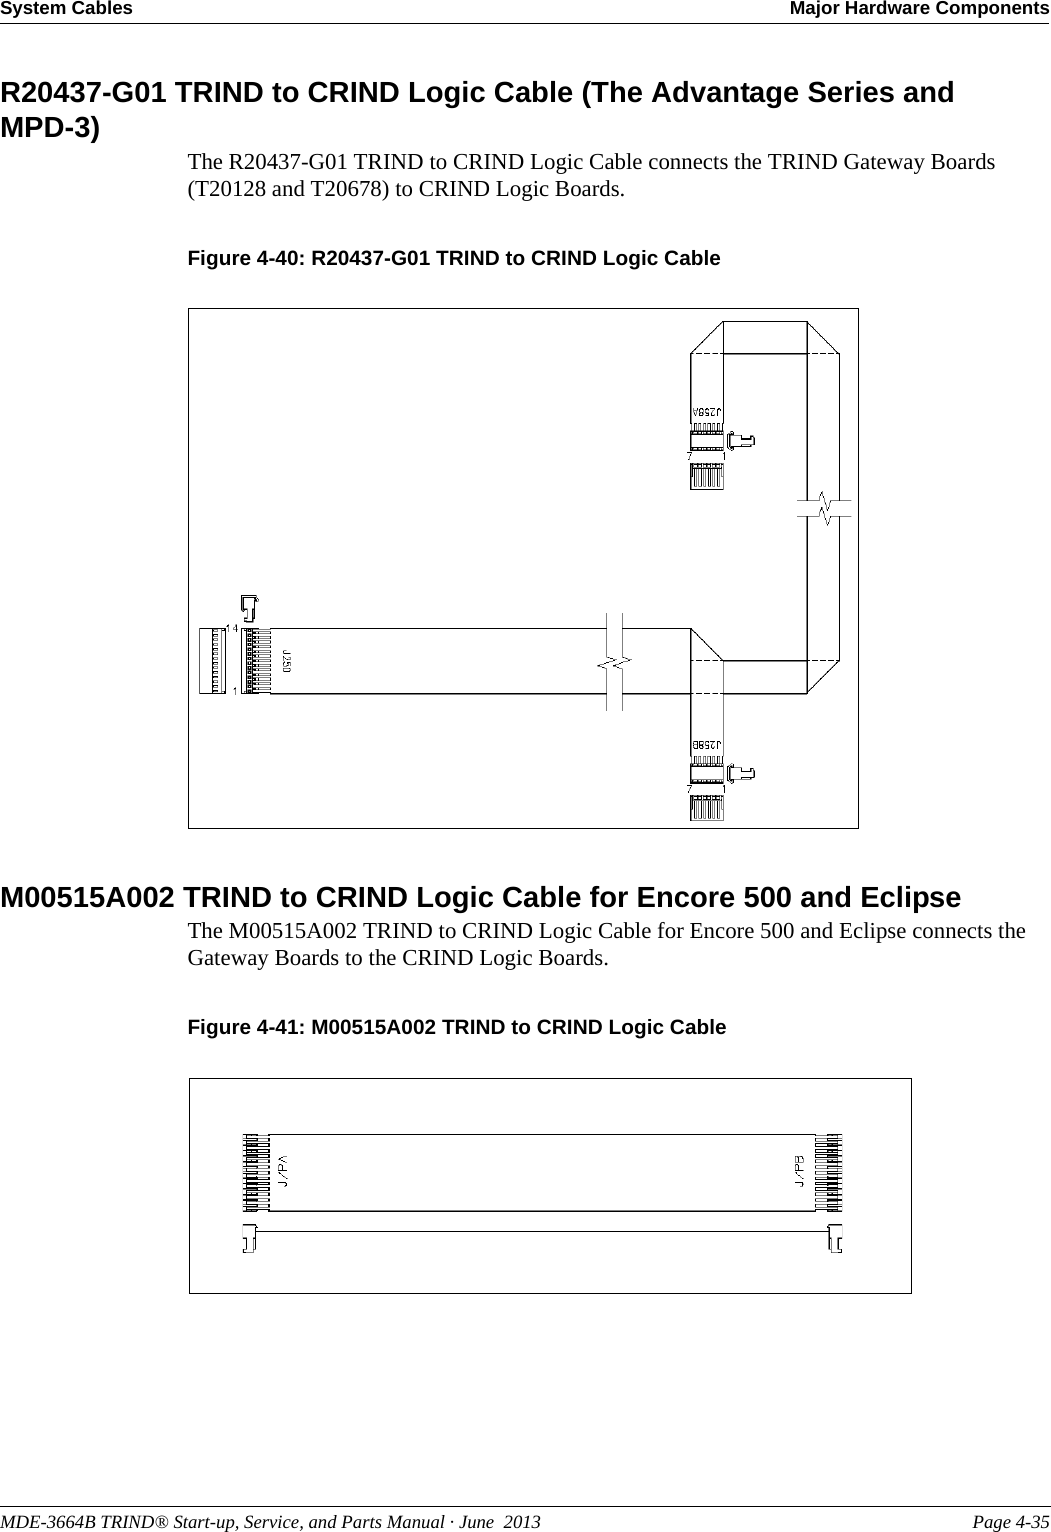 MDE-3664B TRIND® Start-up, Service, and Parts Manual · June  2013 Page 4-35System Cables Major Hardware ComponentsR20437-G01 TRIND to CRIND Logic Cable (The Advantage Series and MPD-3)The R20437-G01 TRIND to CRIND Logic Cable connects the TRIND Gateway Boards (T20128 and T20678) to CRIND Logic Boards.Figure 4-40: R20437-G01 TRIND to CRIND Logic CableM00515A002 TRIND to CRIND Logic Cable for Encore 500 and EclipseThe M00515A002 TRIND to CRIND Logic Cable for Encore 500 and Eclipse connects the Gateway Boards to the CRIND Logic Boards.Figure 4-41: M00515A002 TRIND to CRIND Logic Cable